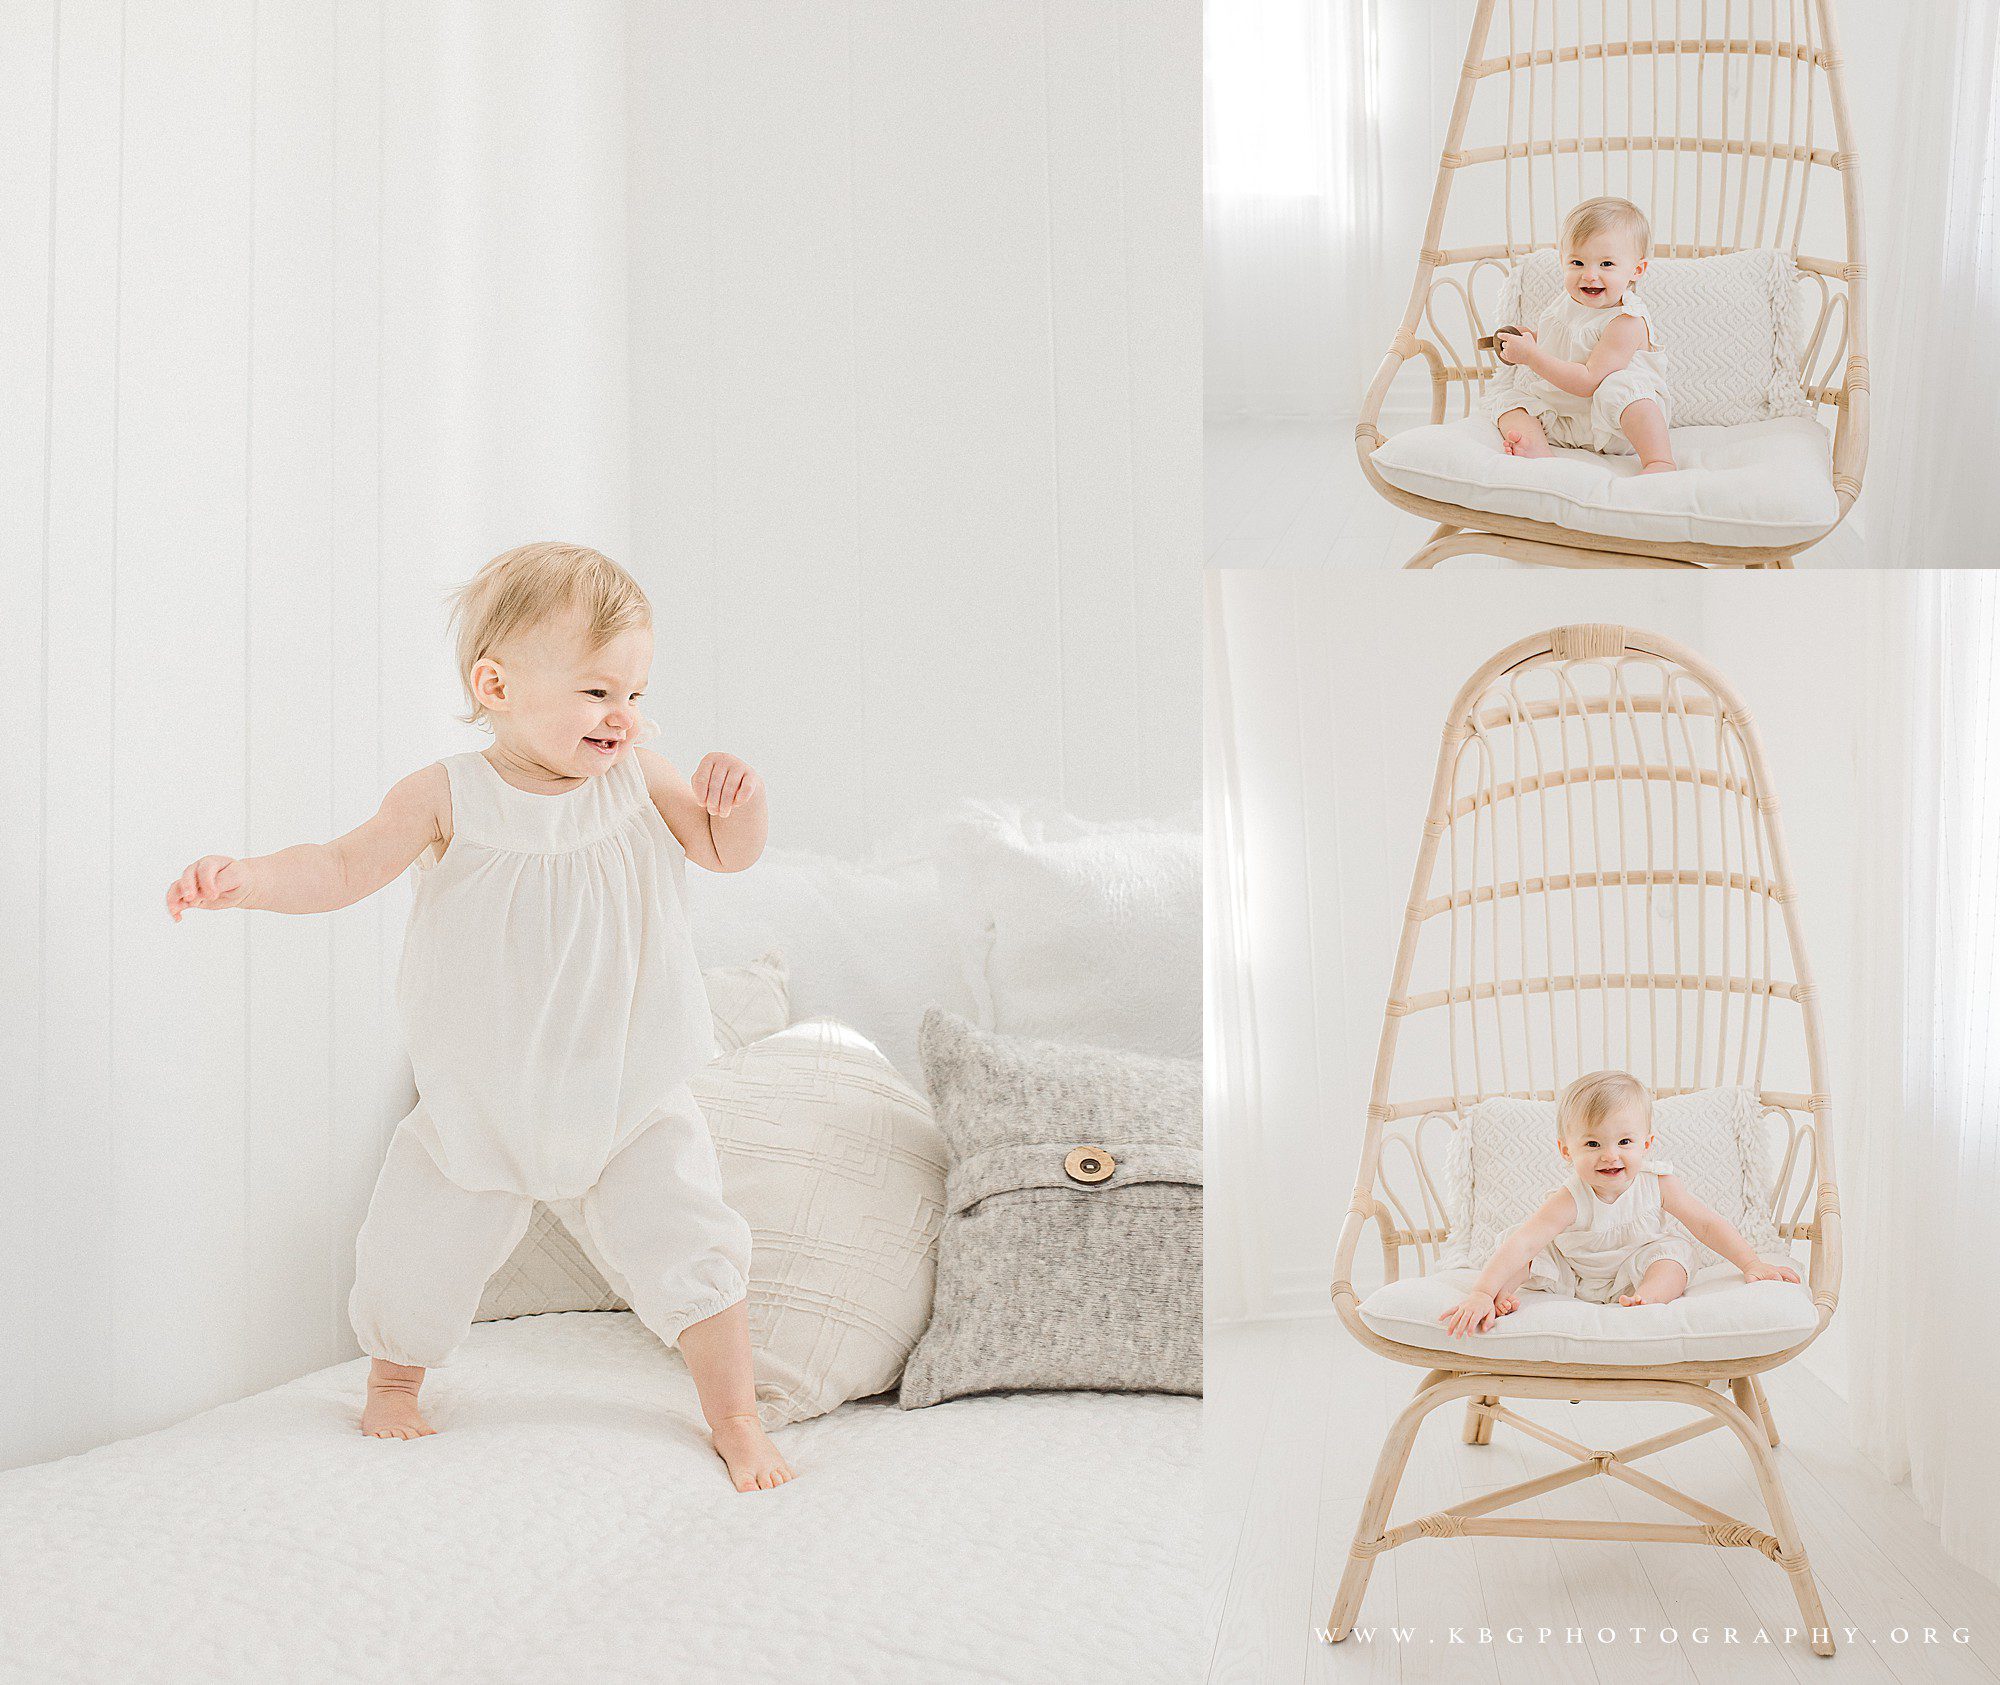 marietta photographer - one year old baby playing on the bed and sitting in a chair